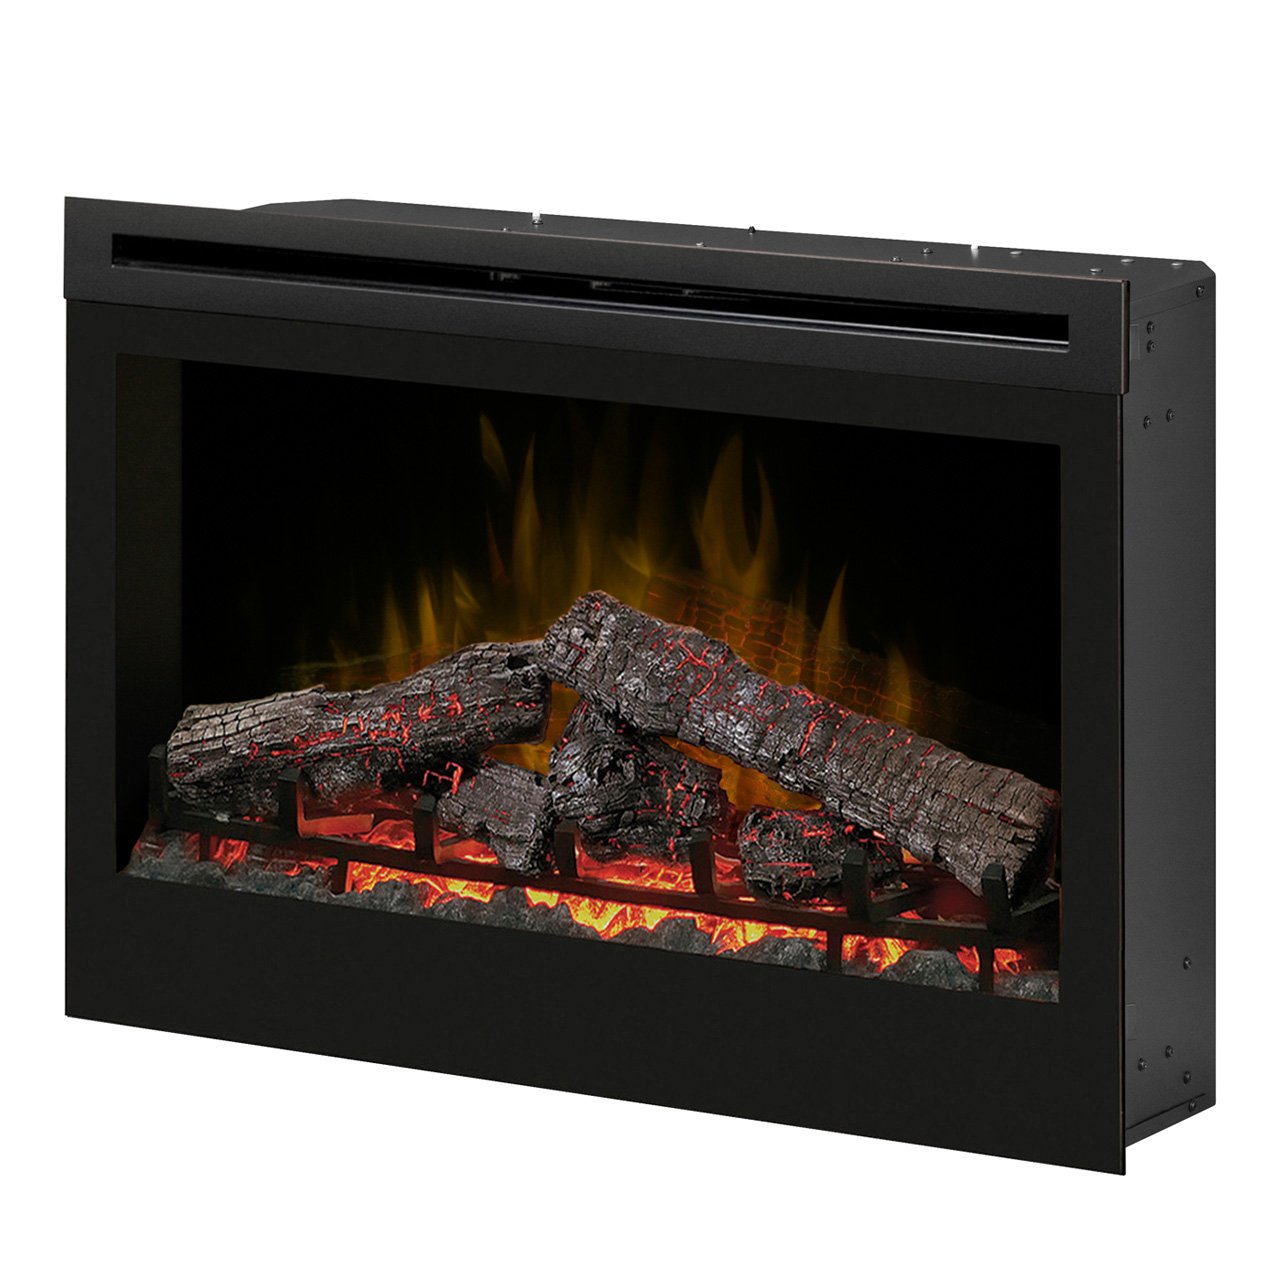 Modern Gas Fireplace Lovely Dimplex Df3033st 33 Inch Self Trimming Electric Fireplace Insert